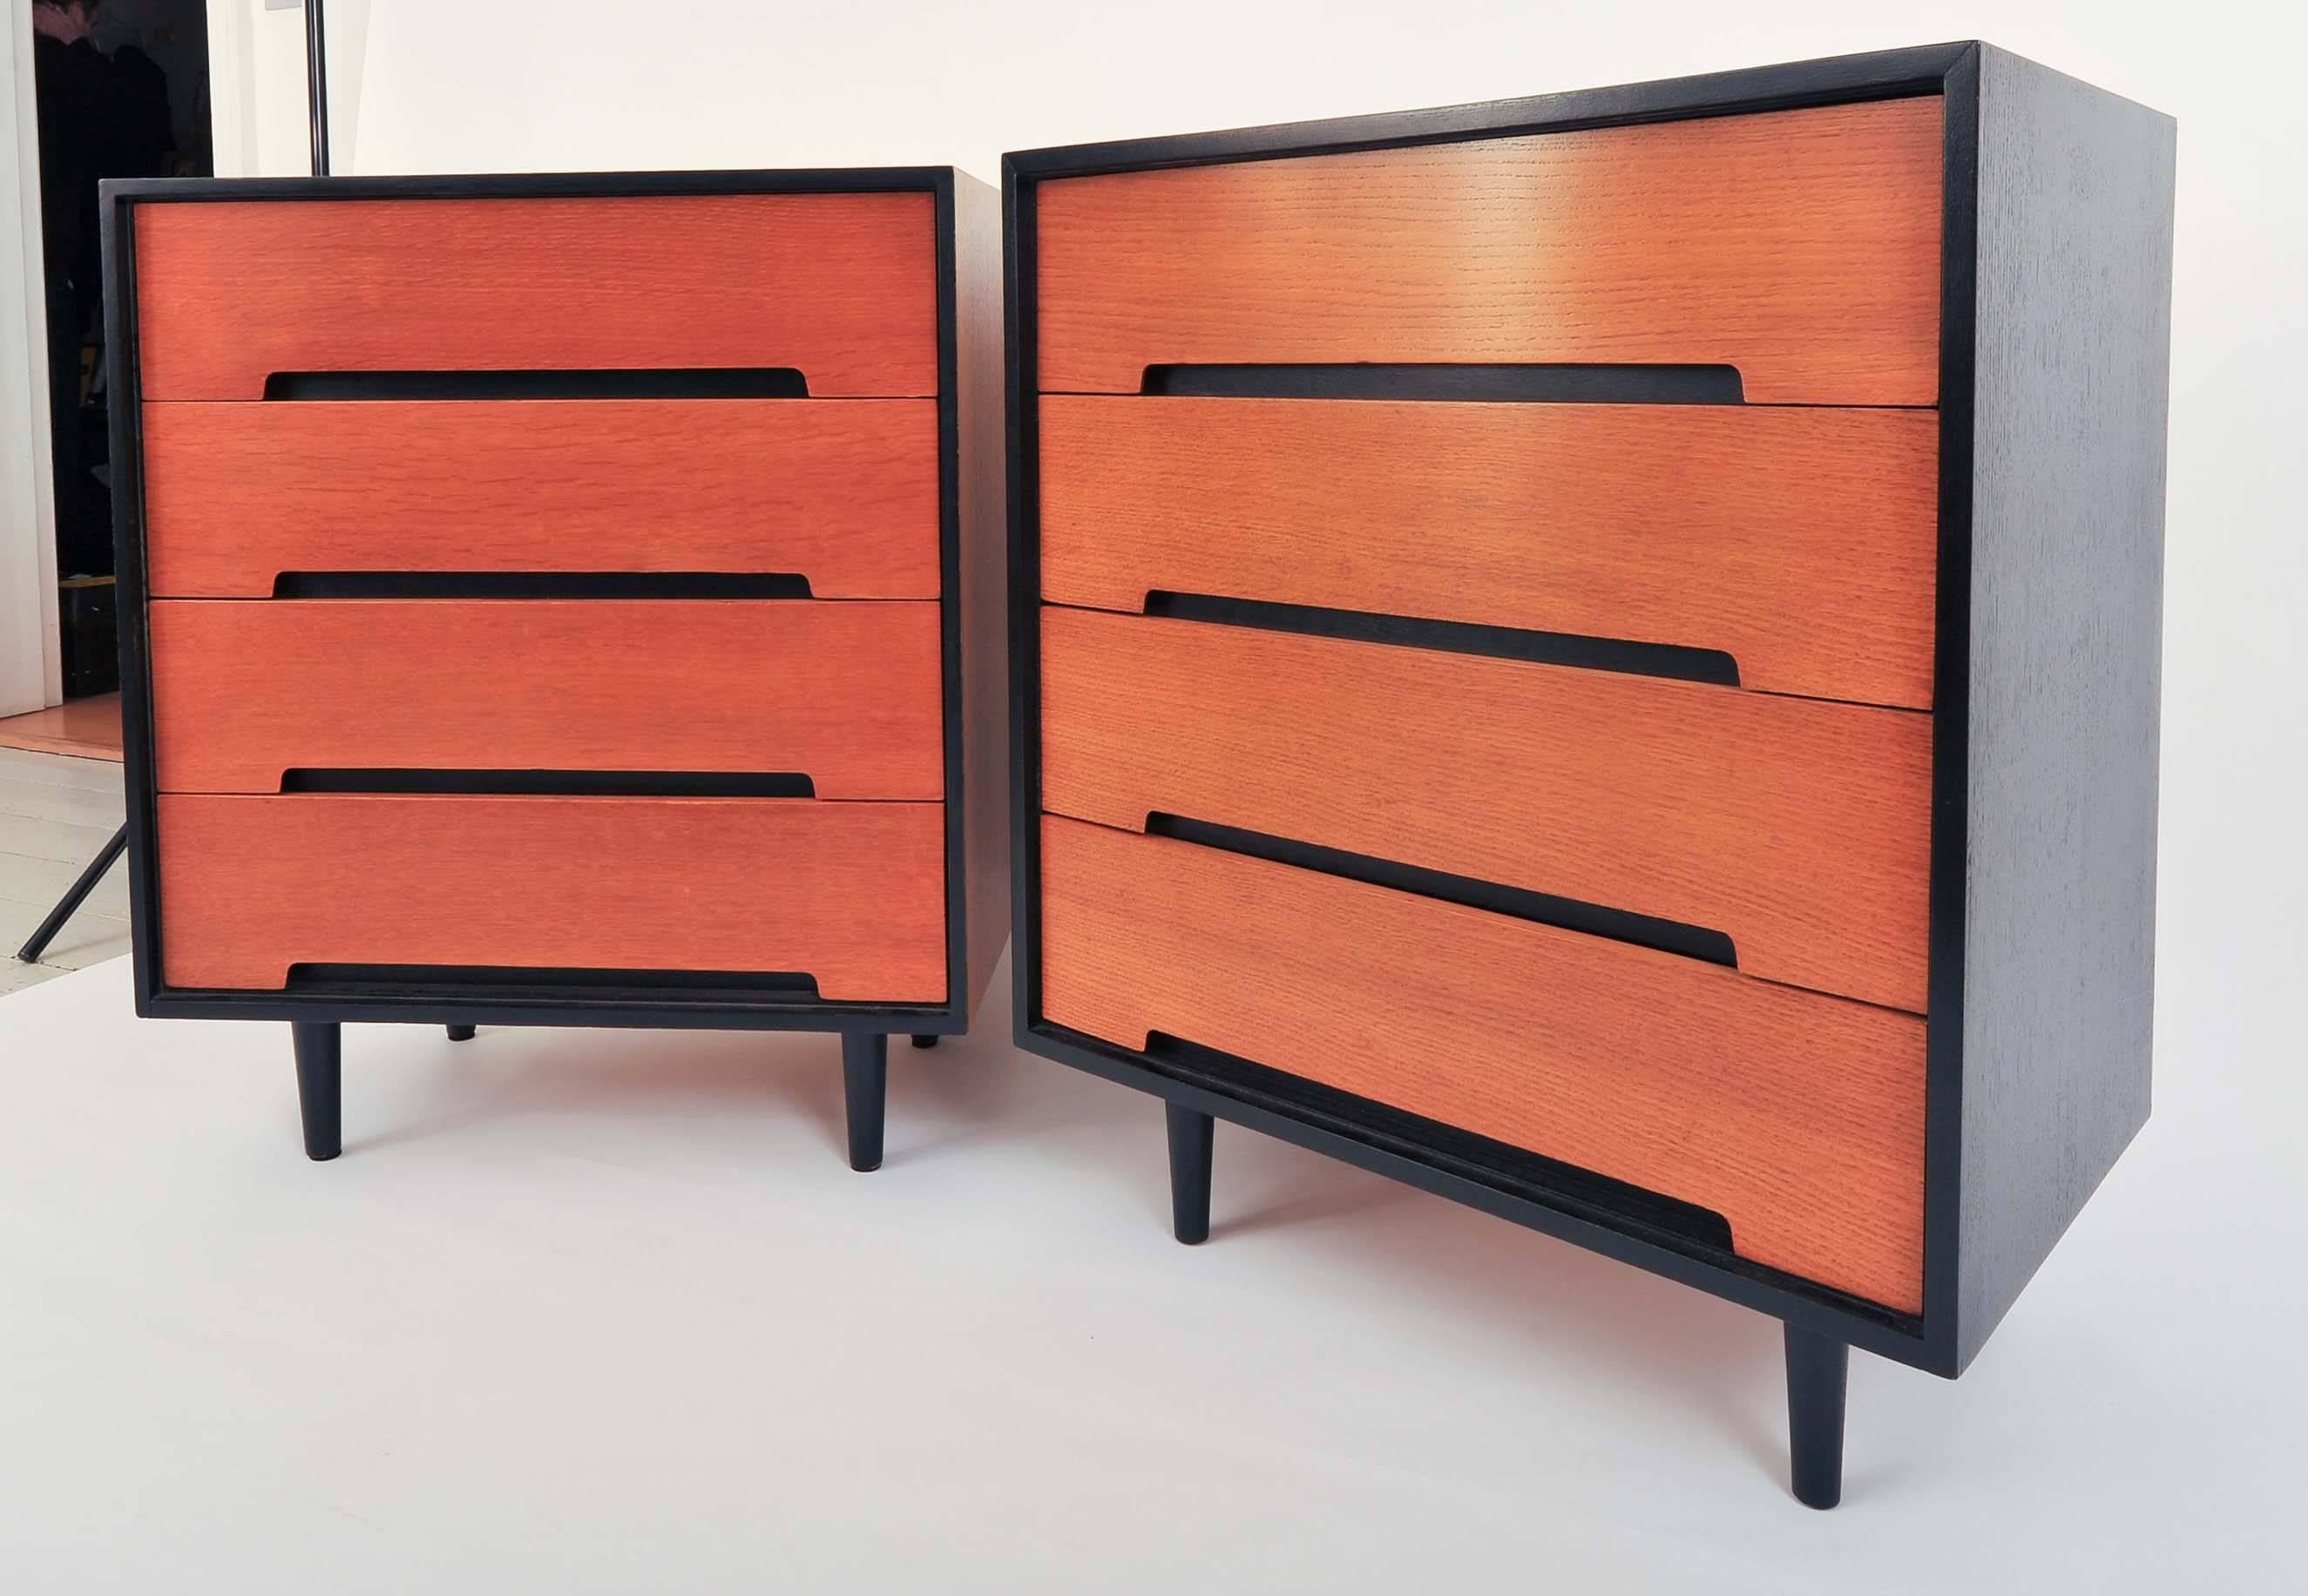 A 1960s black and wood four-drawer chest of drawers by renowned maker, Stag. The one with black top and sides is now sold but, the other with wood top and sides is available. It has black facings, feet and handles.

Basic to the door shipping